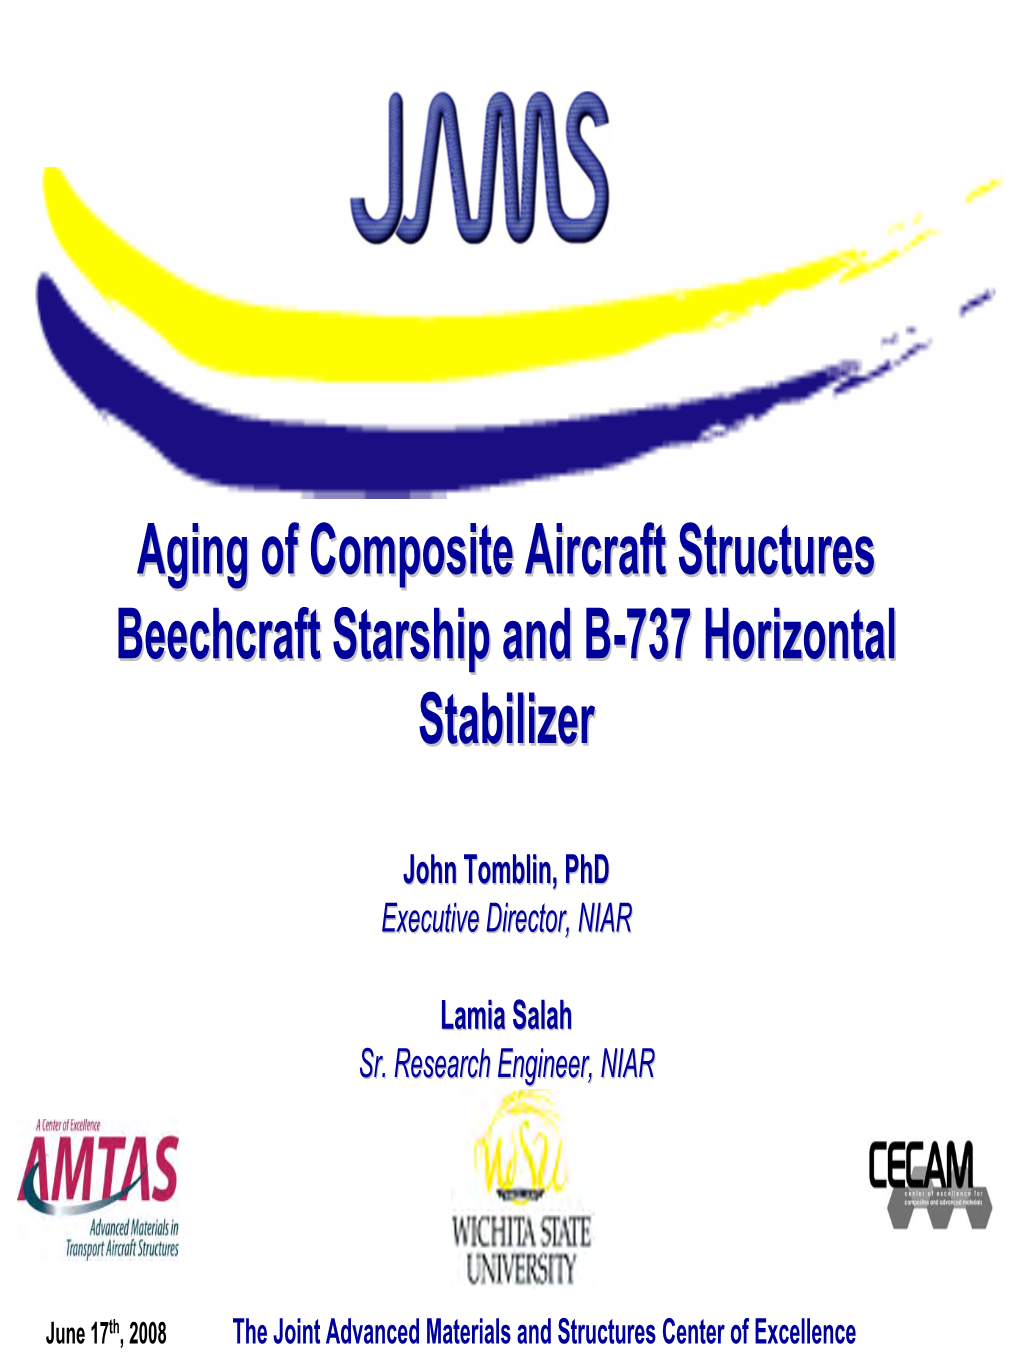 Aging of Composite Aircraft Structures Beechcraft Starship and B-737